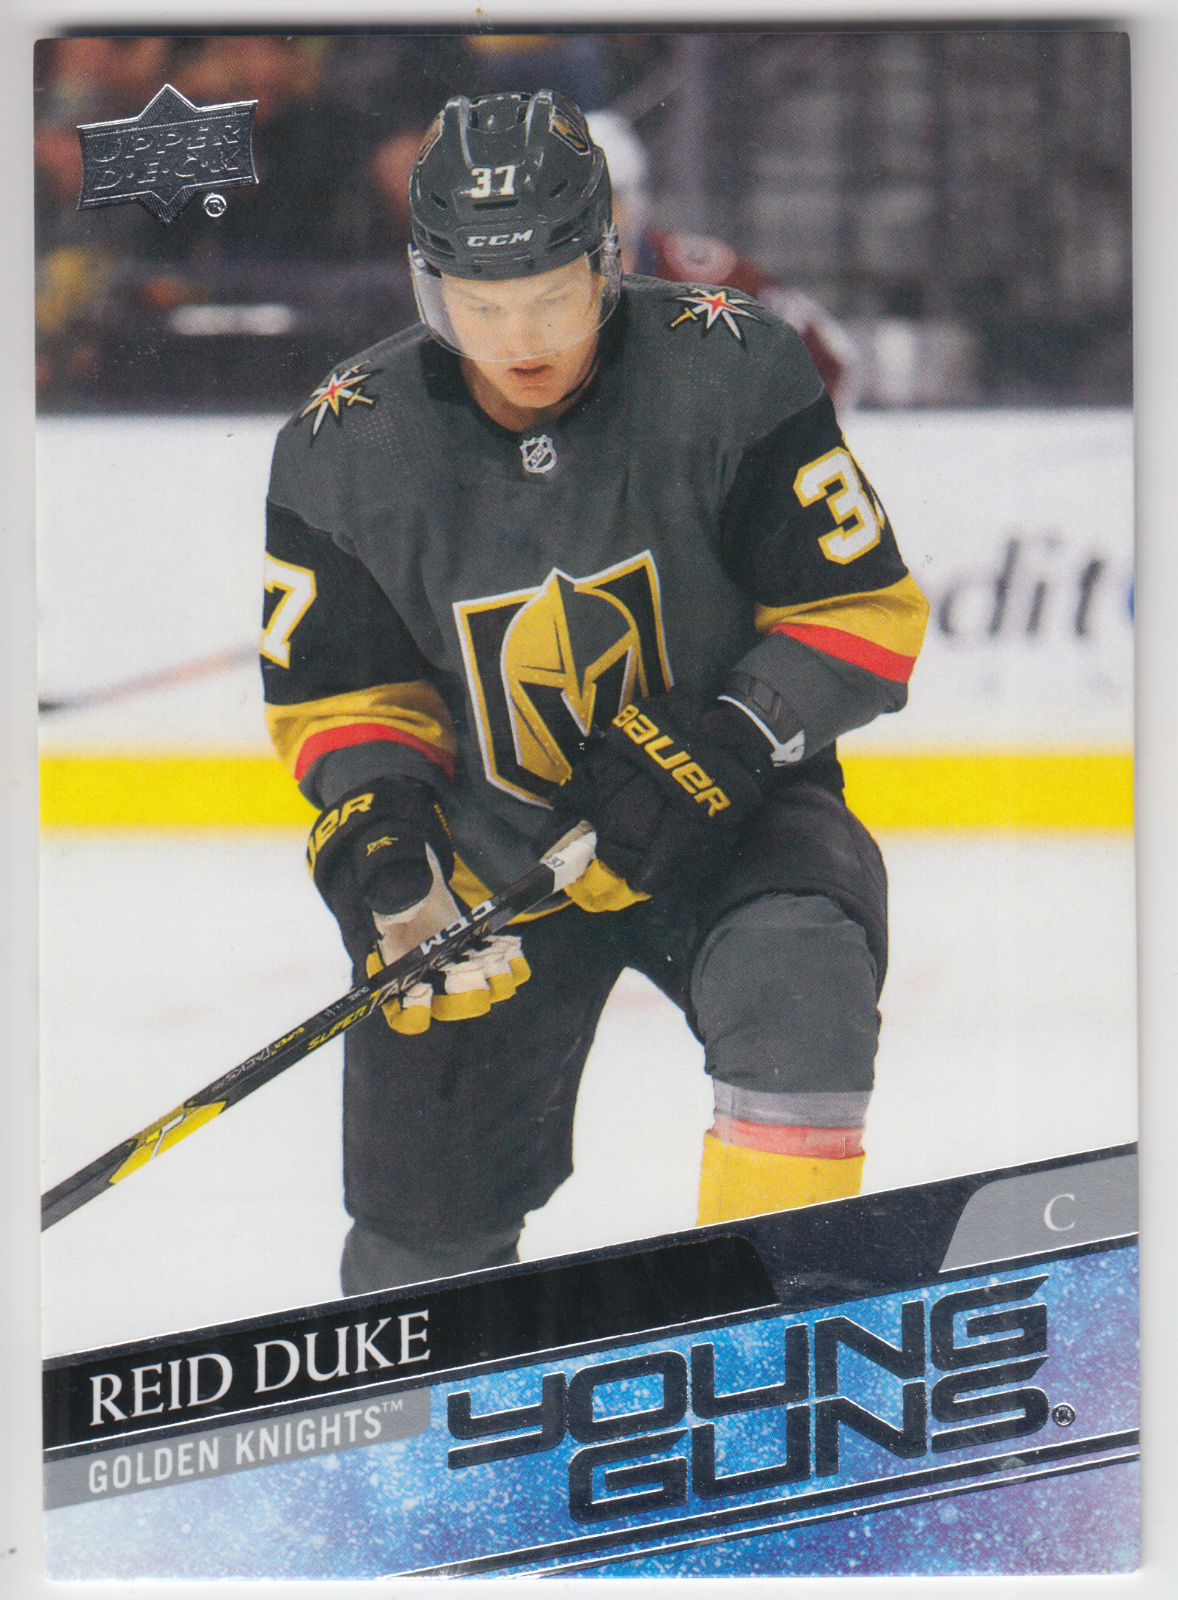 2020/21 UPPER DECK REID DUKE RC ROOKIE YOUNG GUNS CARD #202. rookie card picture